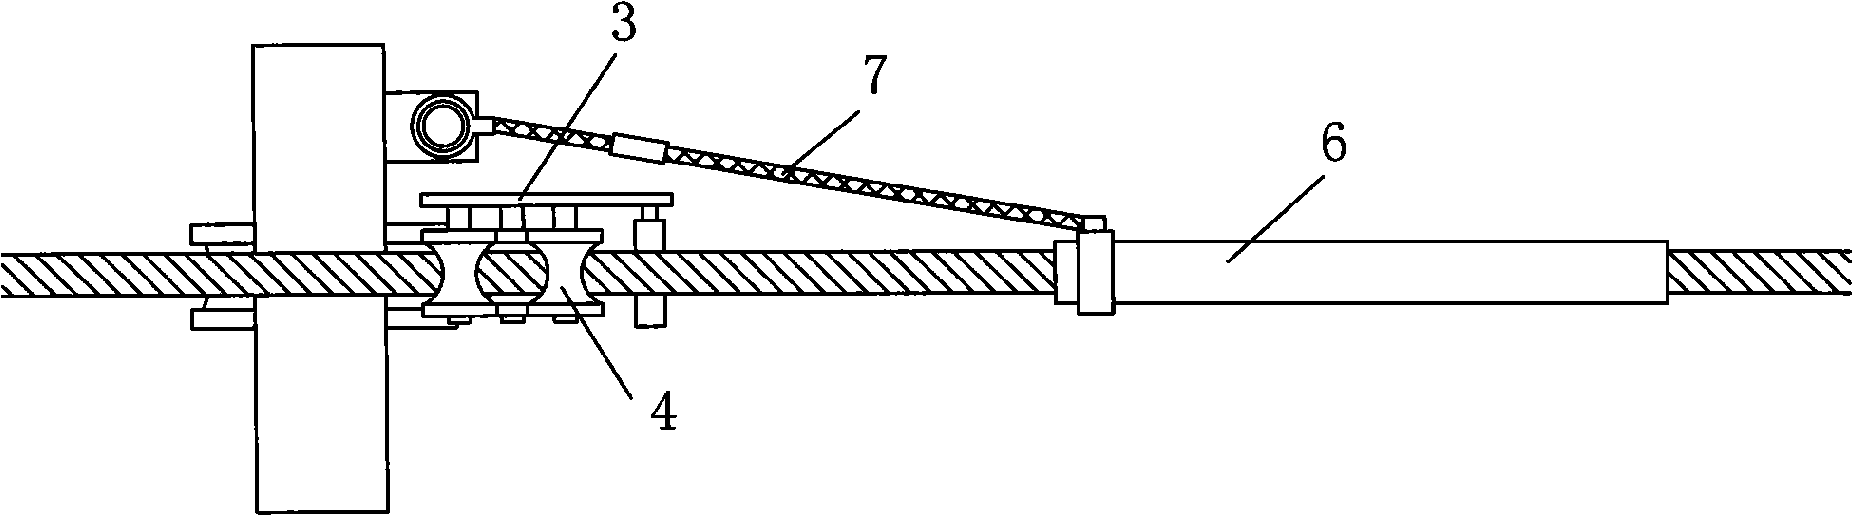 Mechanical coiling longitudinally wrapping paper tape device